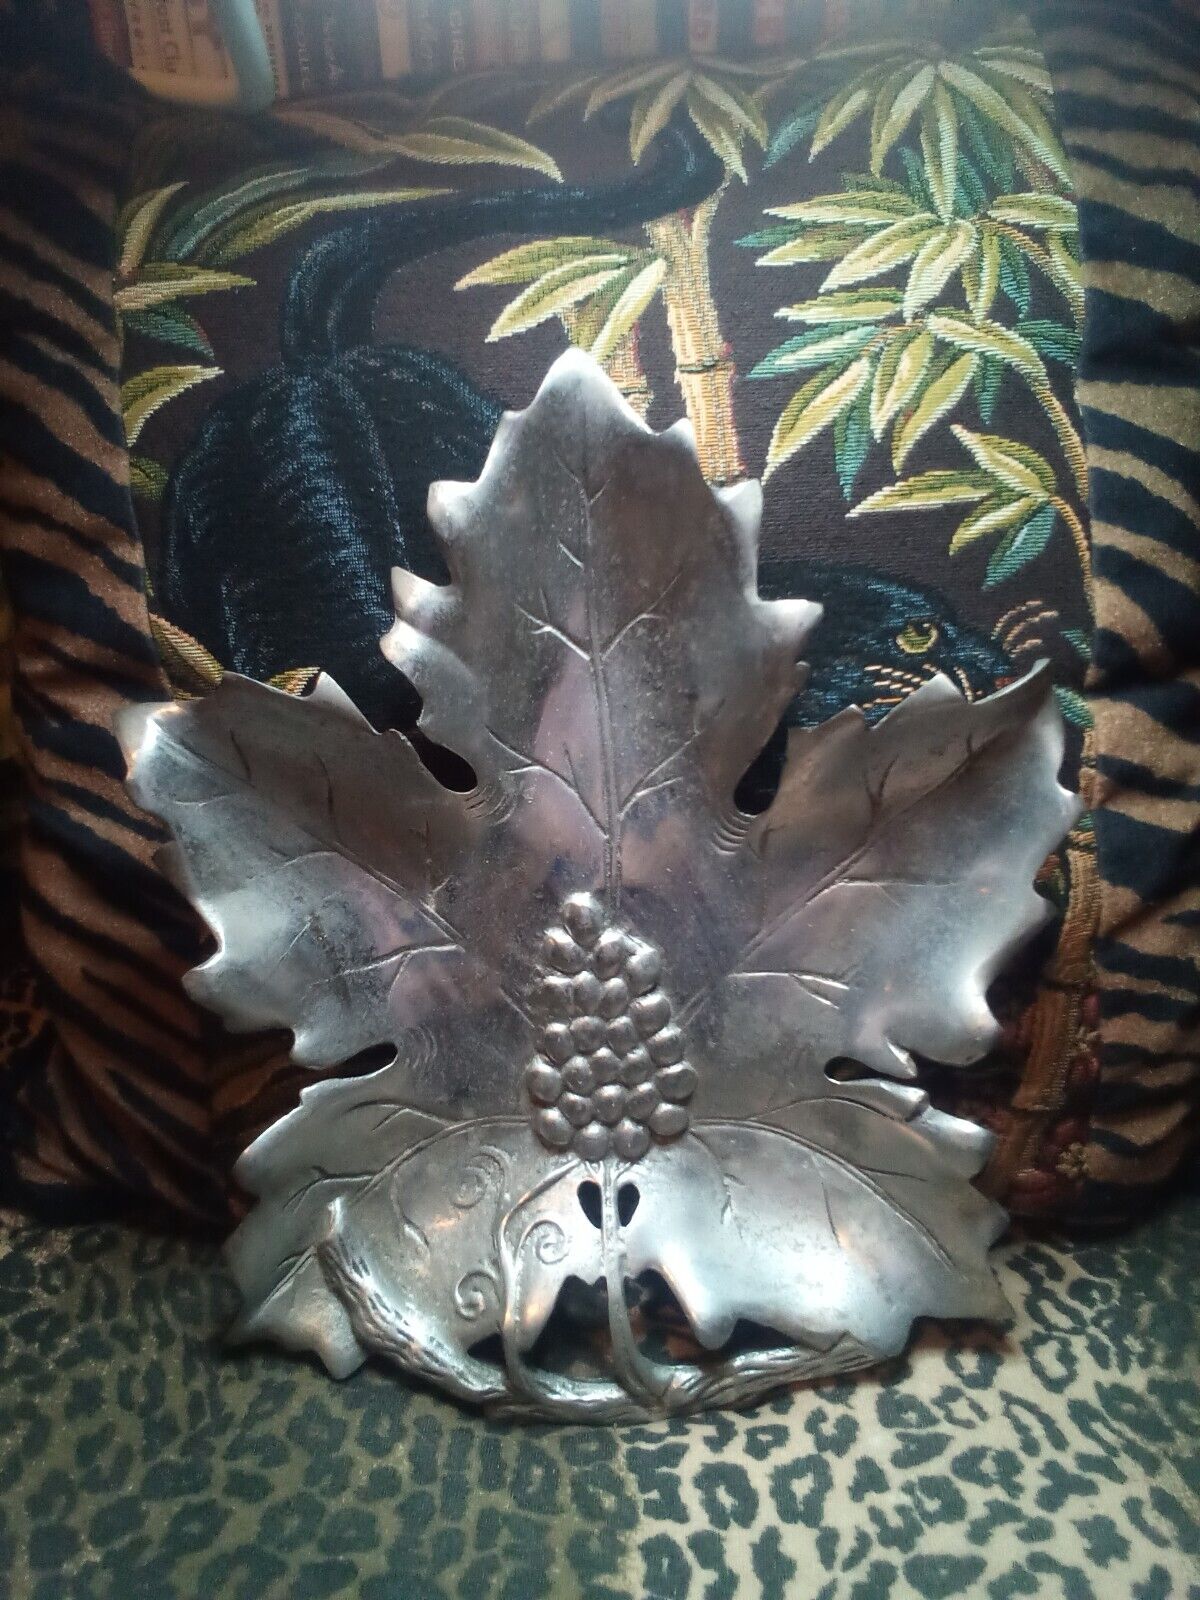 Large aluminum or pewter leaf tray,needs a cleaning.